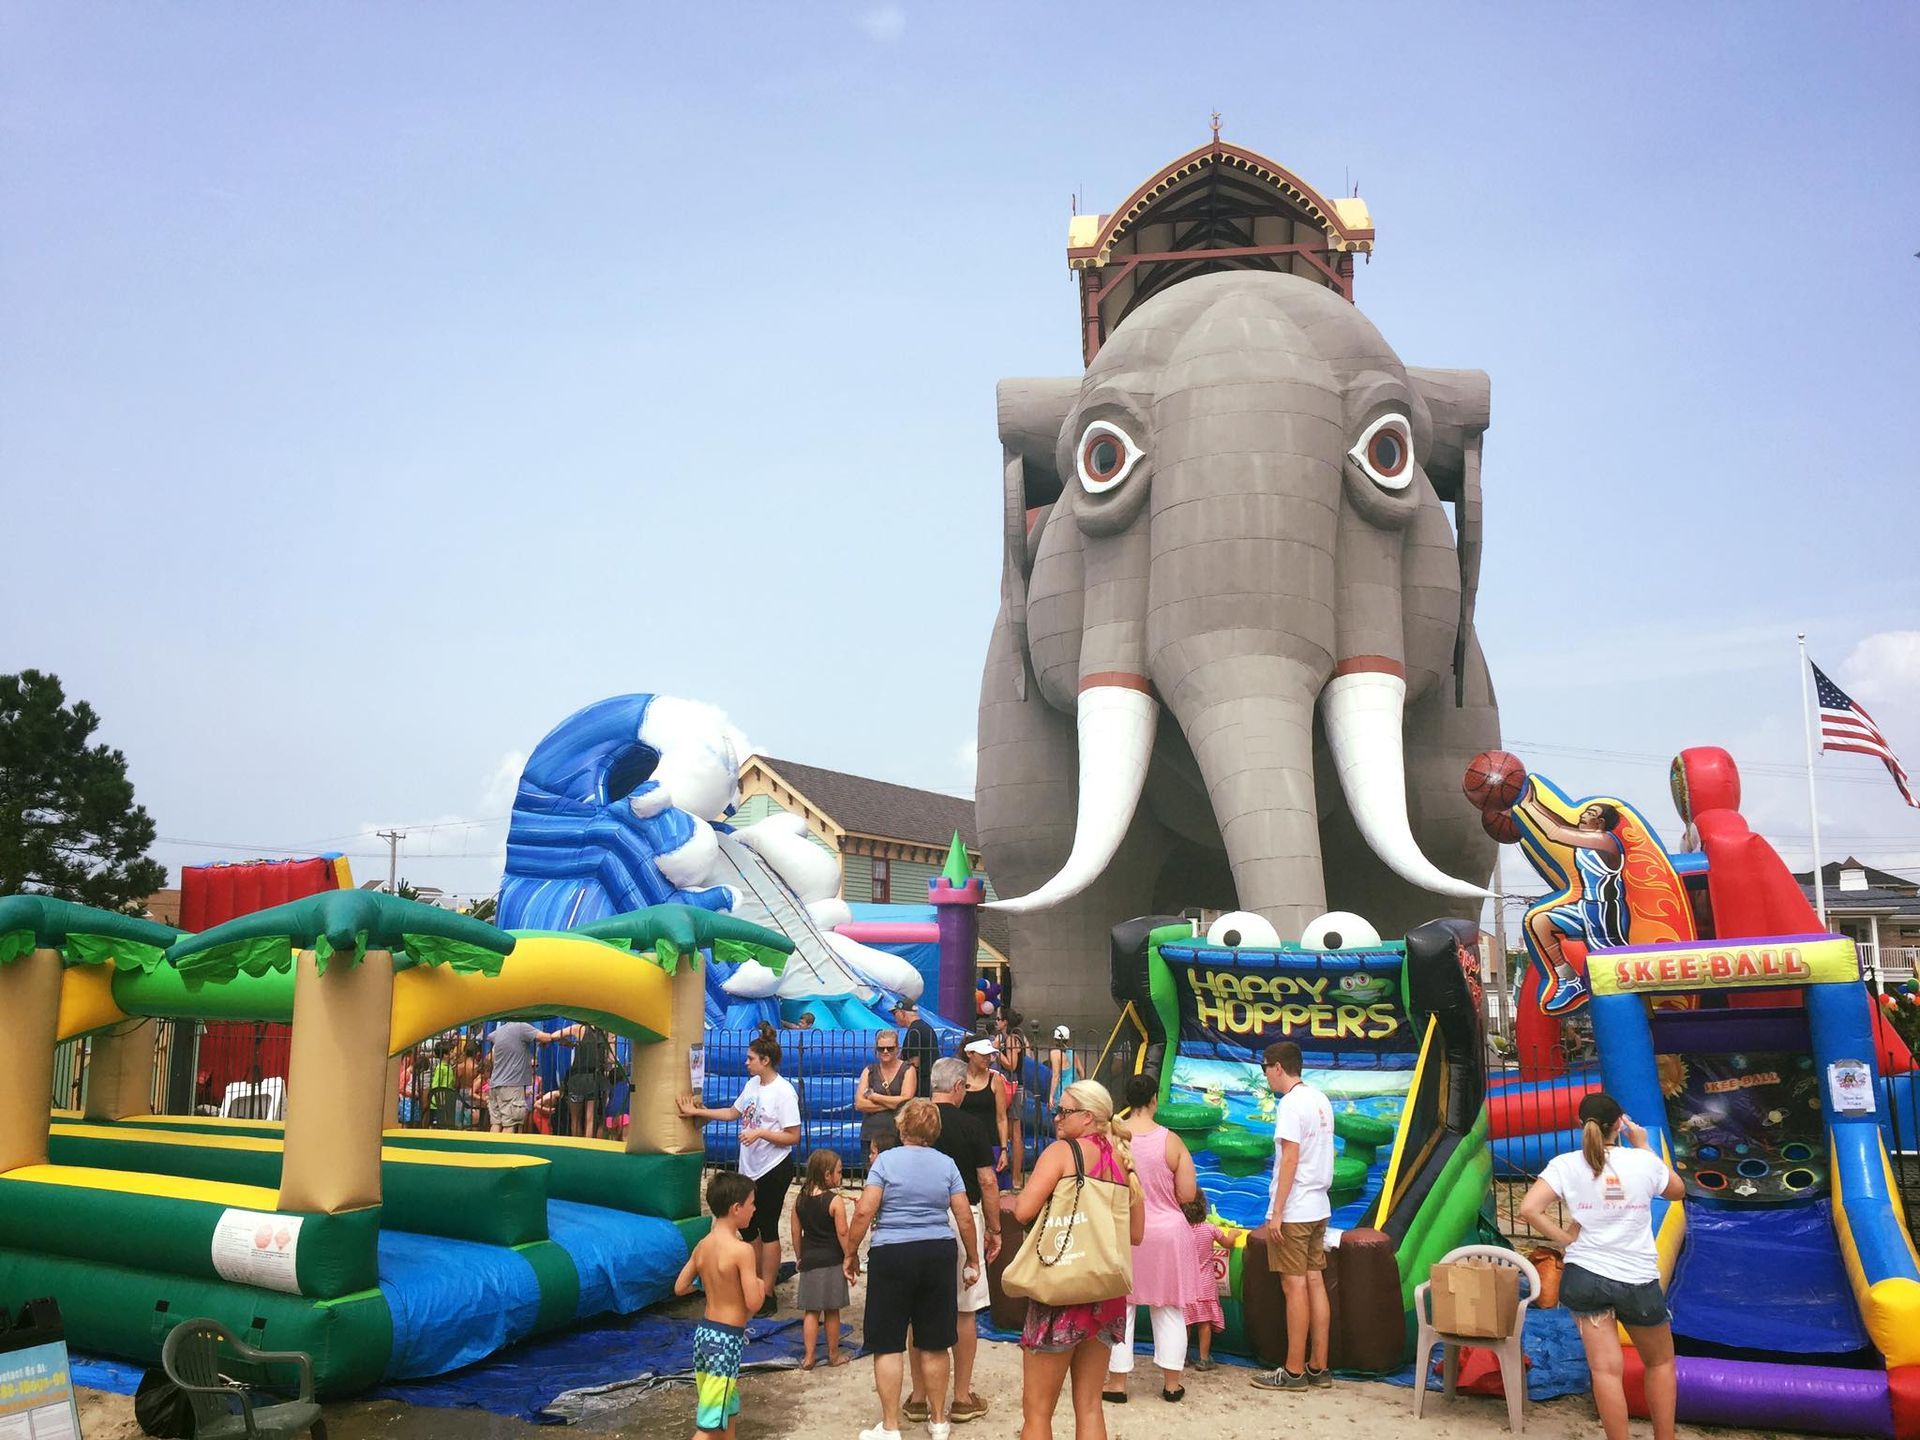 World's Largest Elephant Statue: world record in Margate City, New Jersey